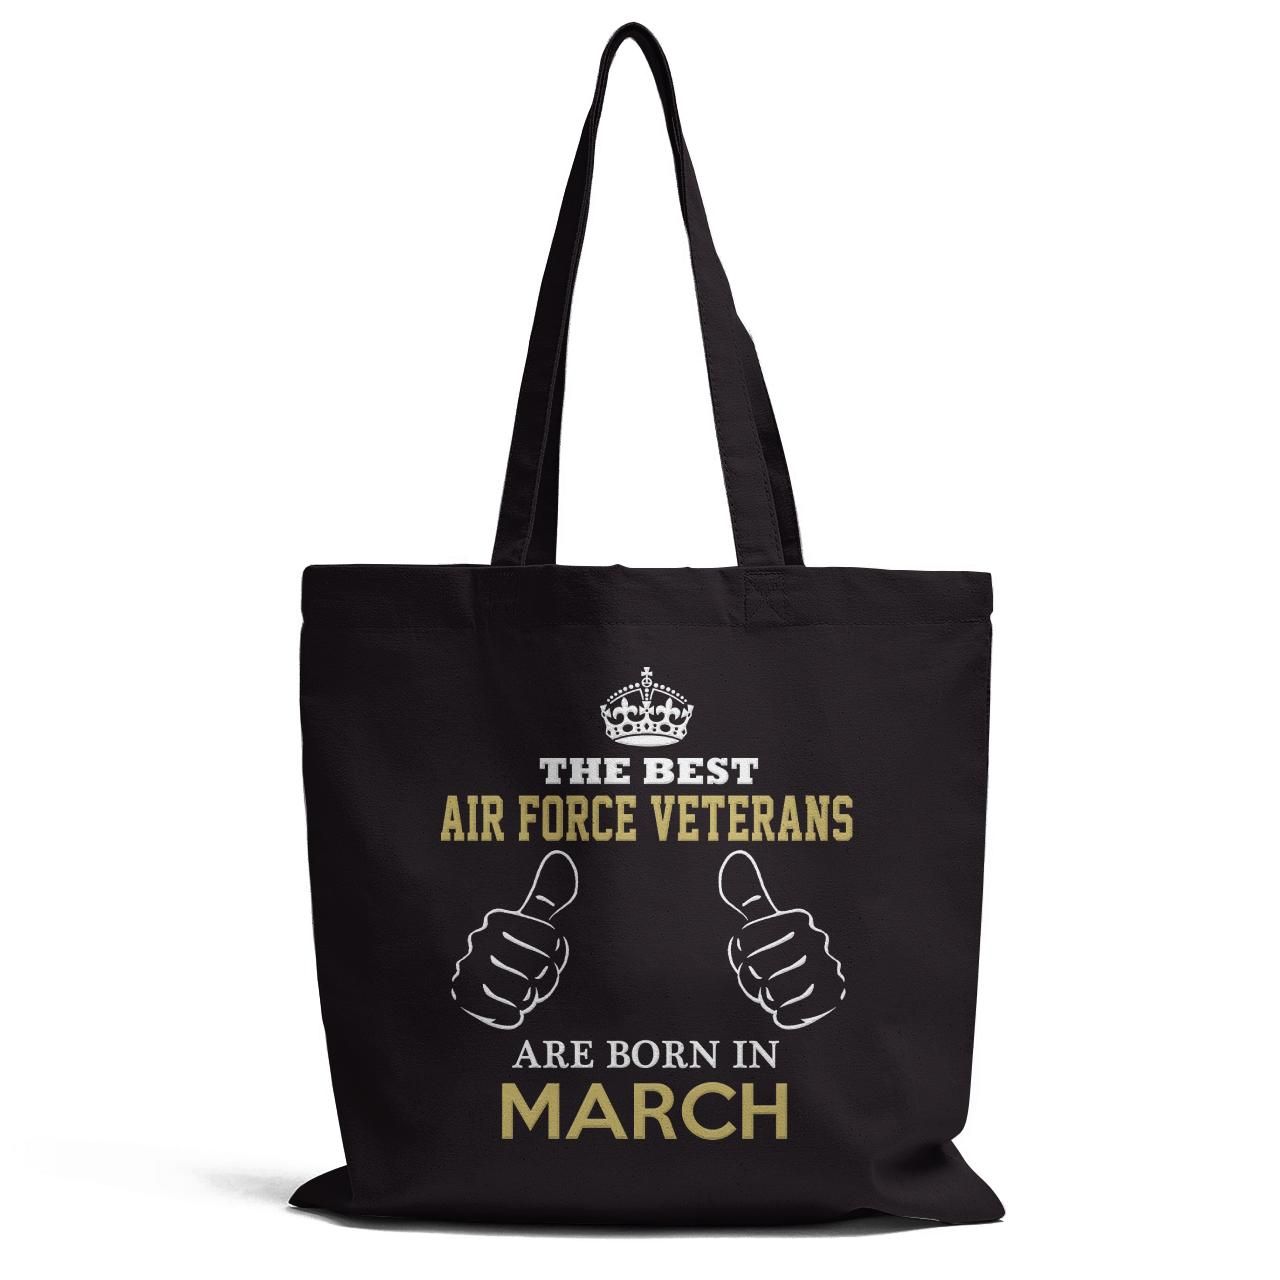 The Best Air Force Veterans Are Born In March Tote Bag